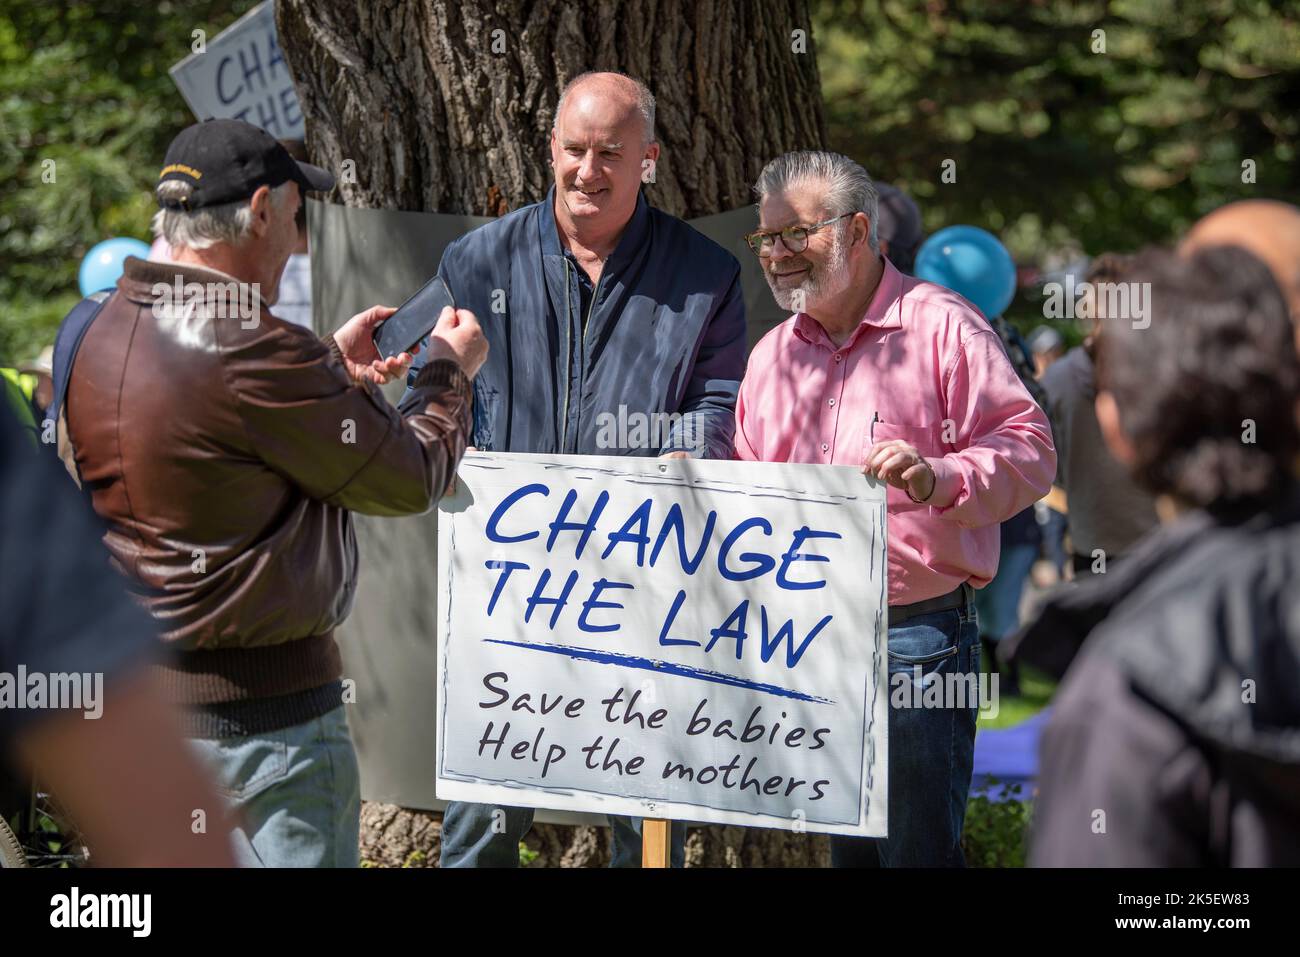 Melbourne, Australia, October 8th 2022. Liberal MP Bernie Finn poses with a protester at an anti-abortion march. Credit: Jay Kogler/Alamy Live News Stock Photo